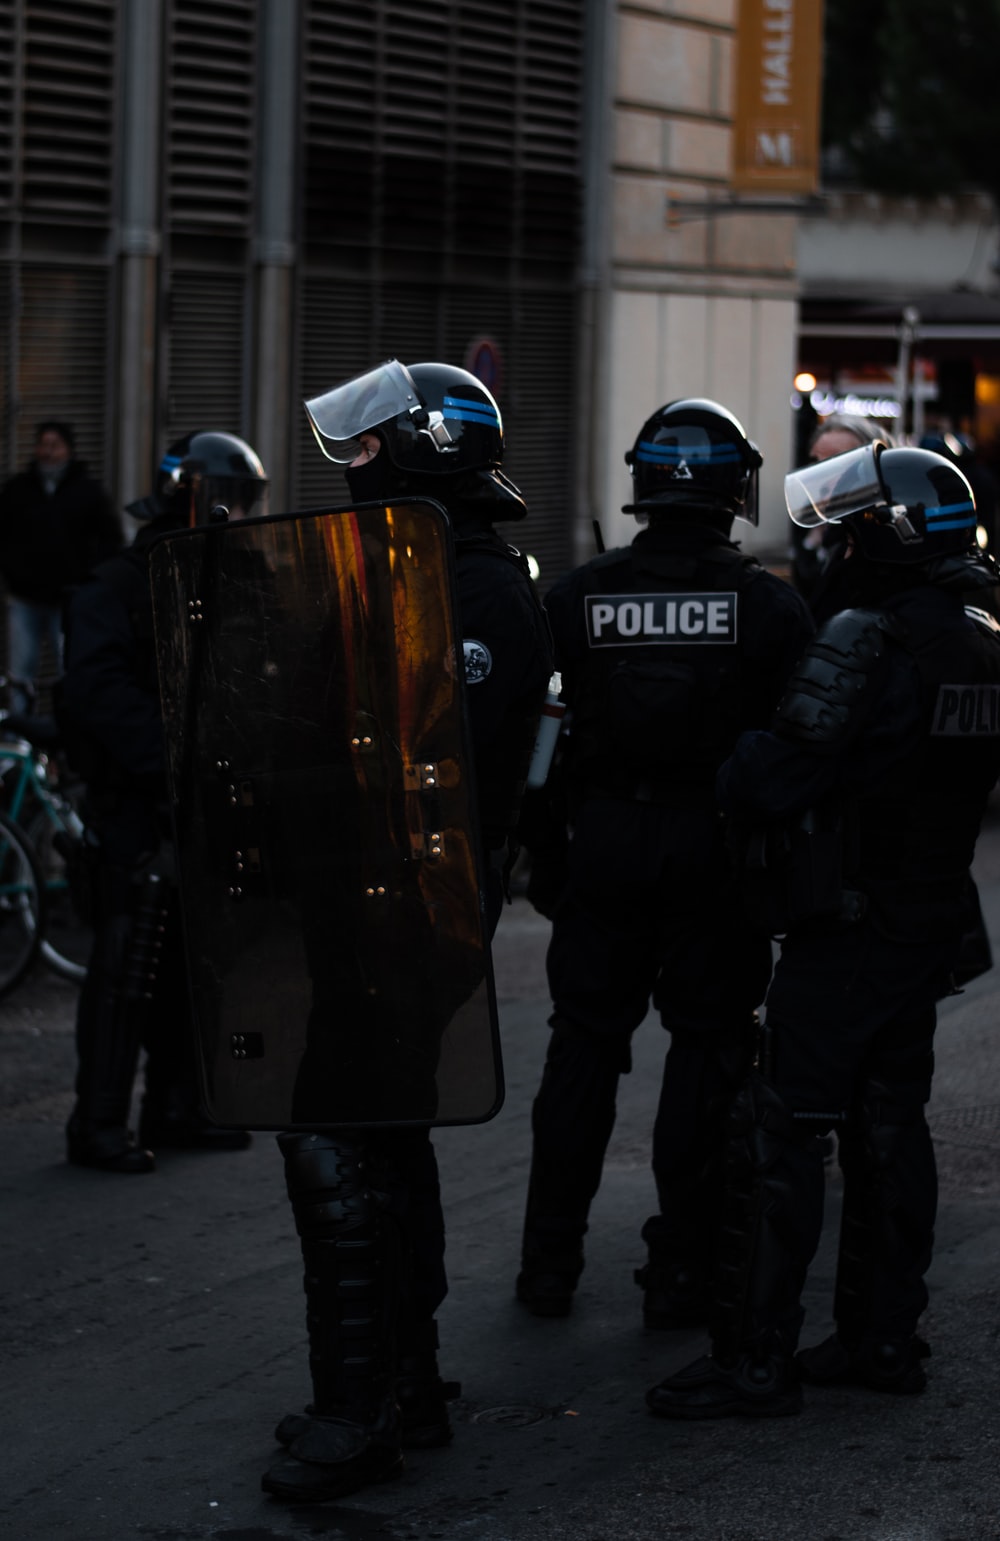 police officer standing and carrying riot shield photo